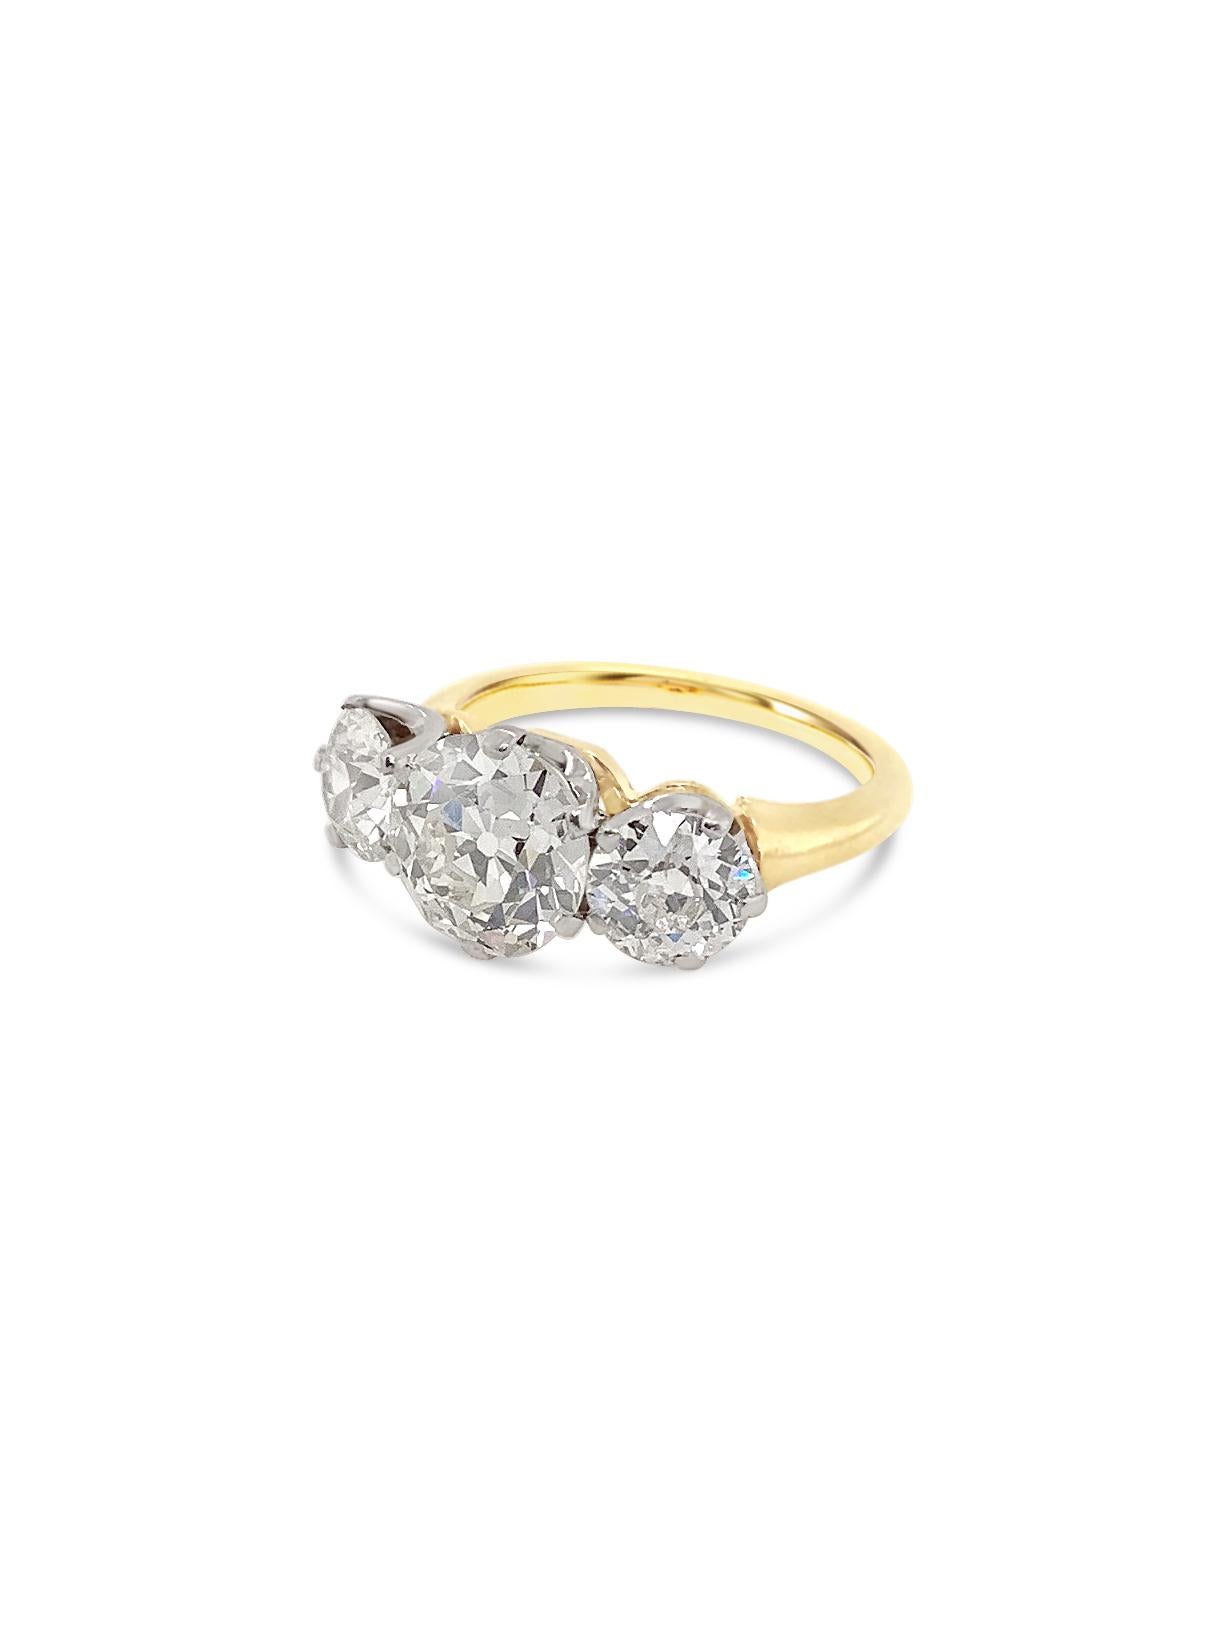 3.59 Carat total weight three-stone Old European cut diamond ring.  Center diamond is 2.15 carats in J VS2 quality, sides are 0.72 each or 1.44 carat total weight in I SI2 quality. 18 karat yellow gold and platinum. Currently finger size 6.5 with